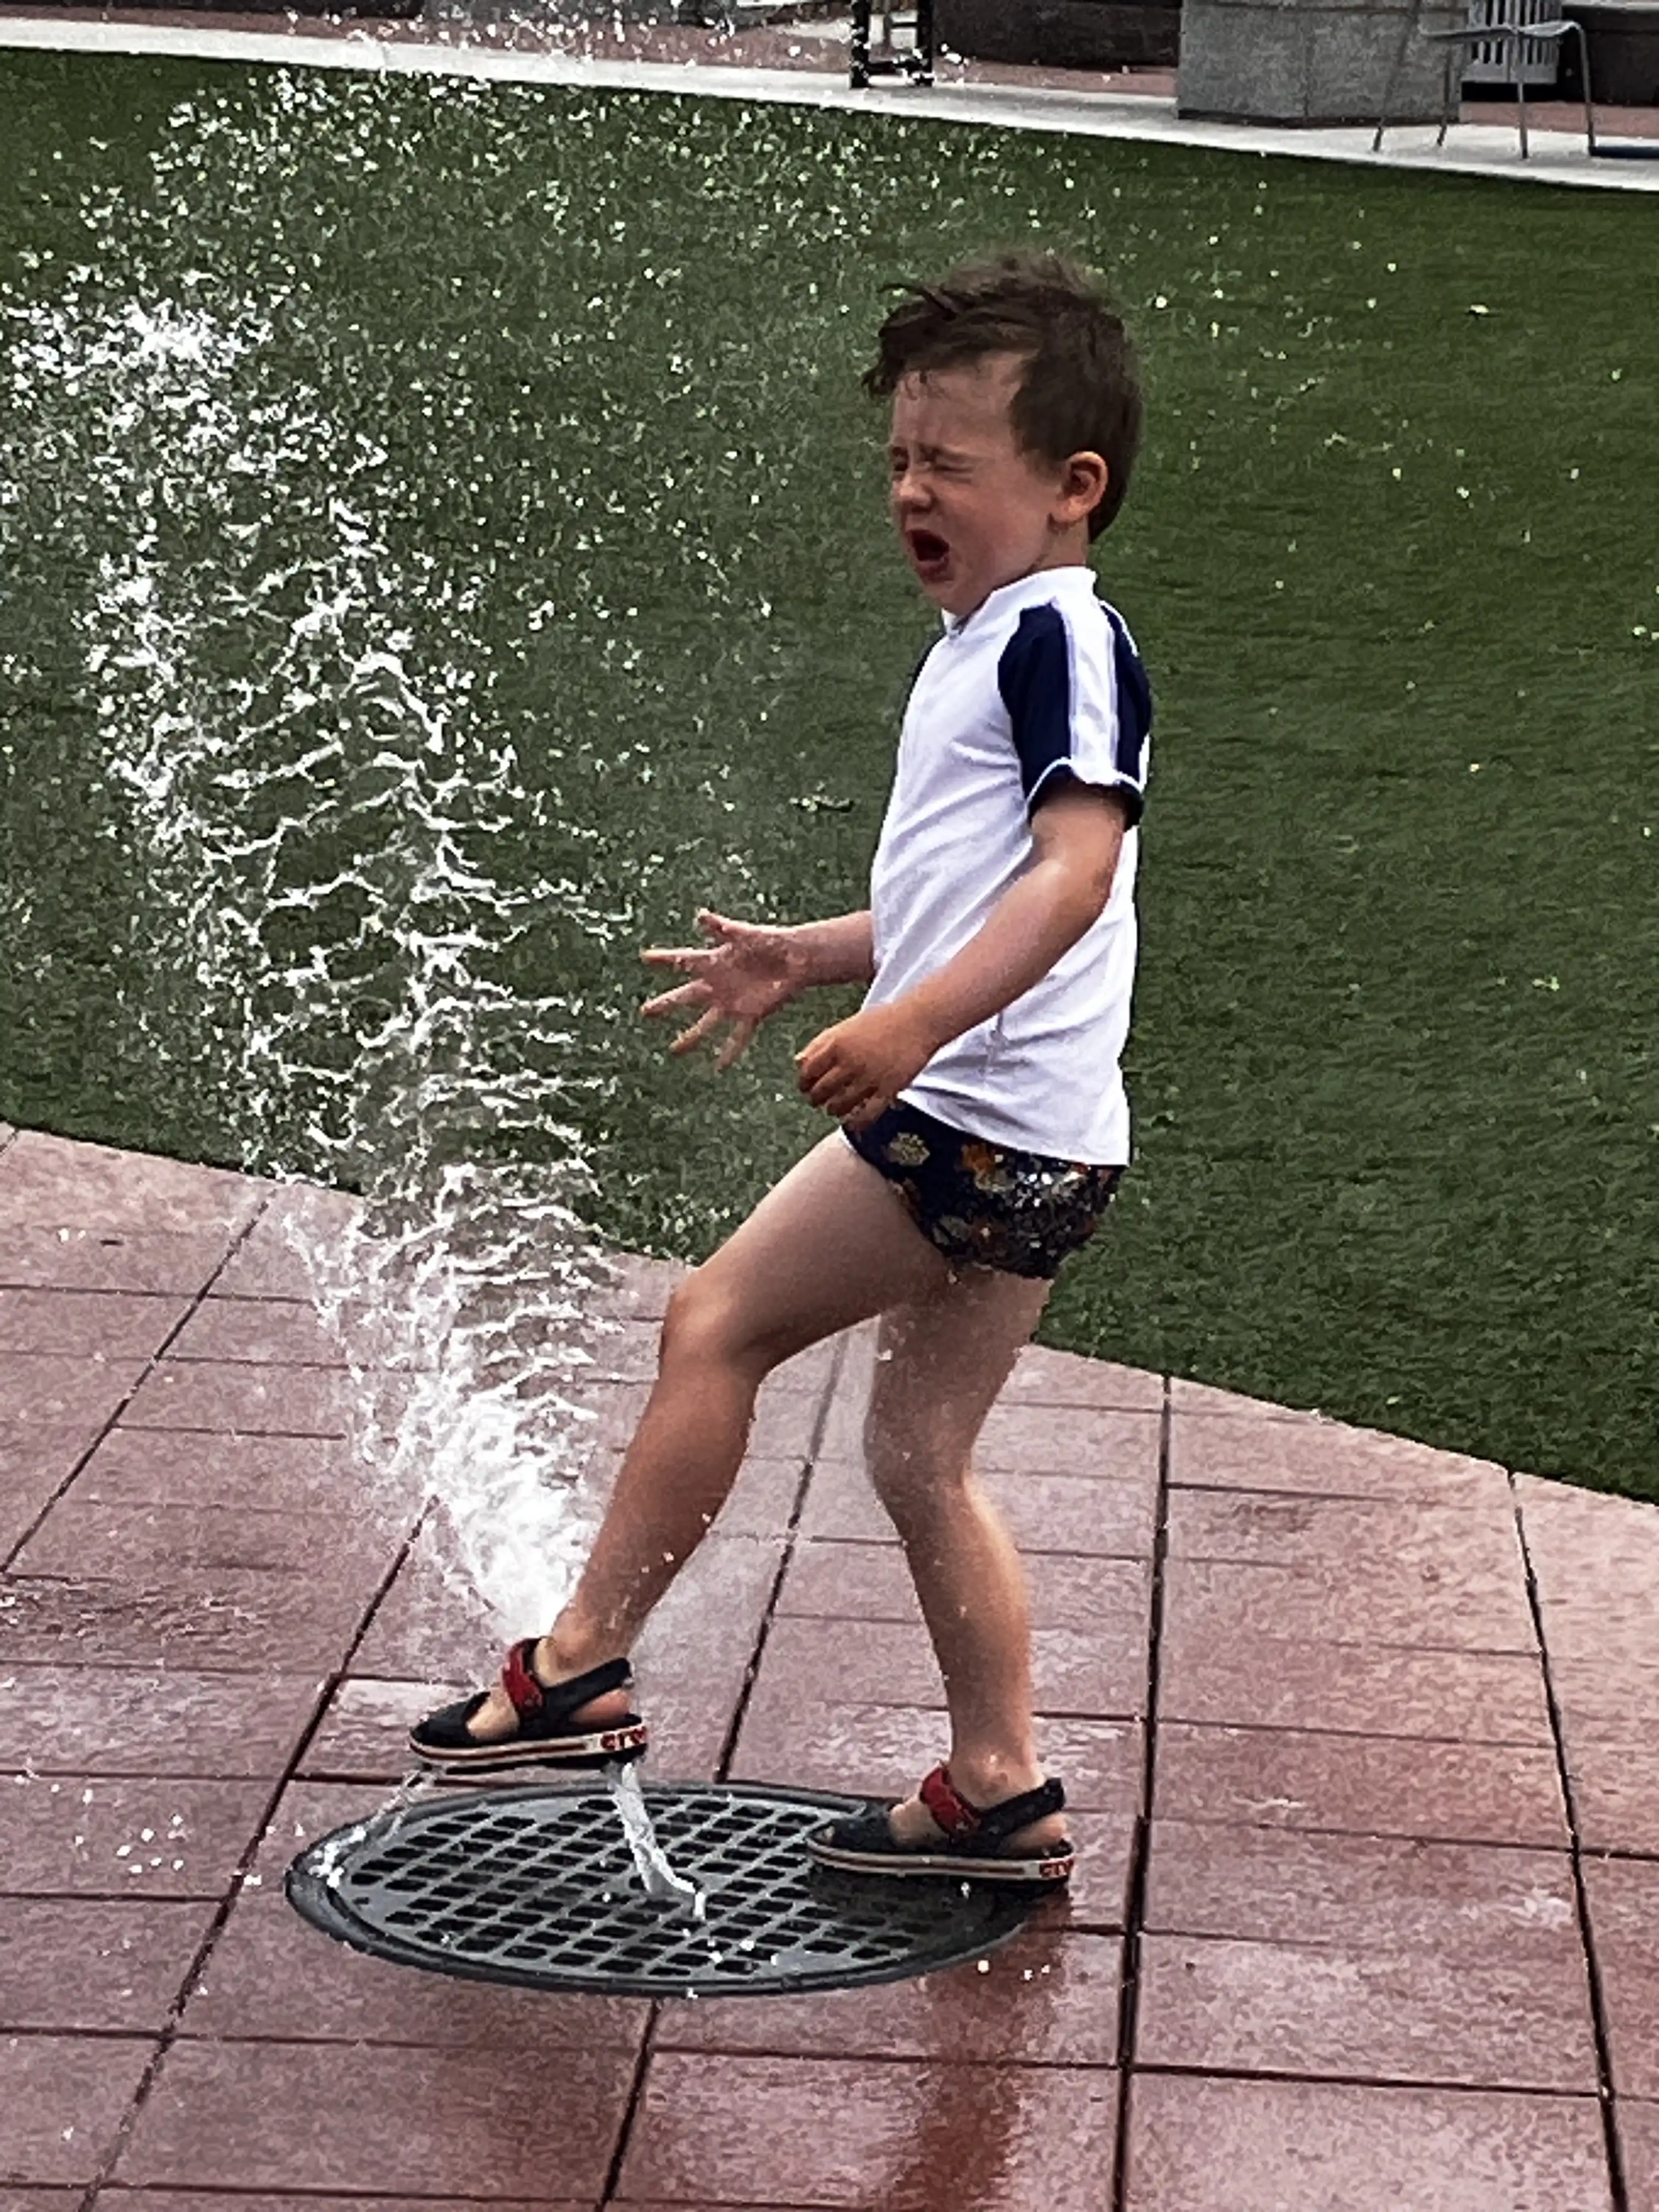 Graham wincing at being sprayed by water at a local water park.